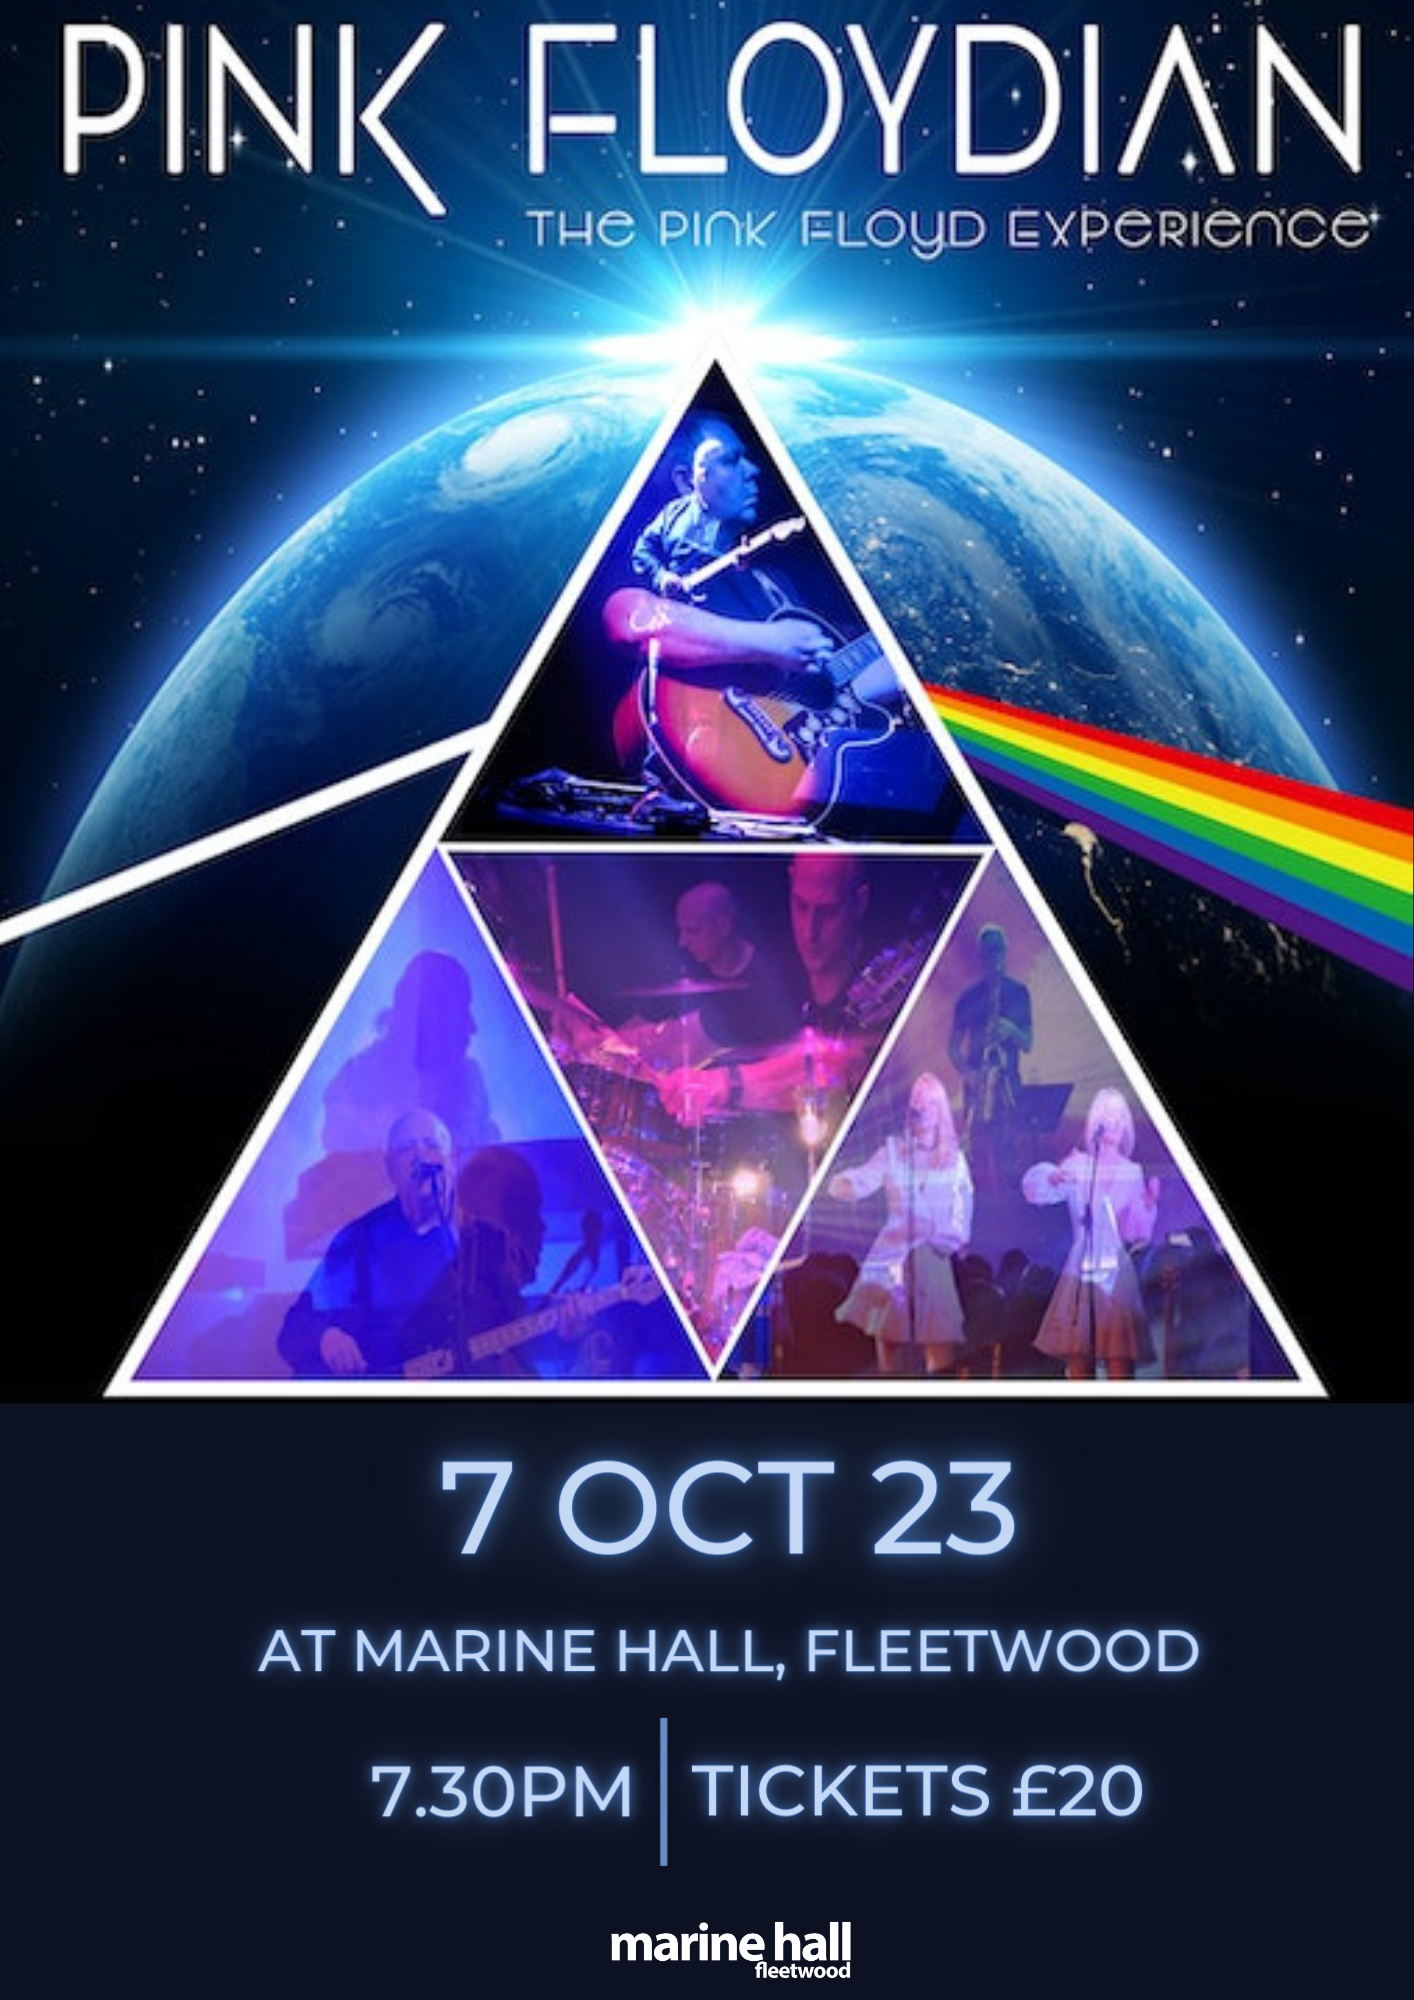 Pink Floydian, The Pink Floyd Experience Poster. 7 Oct 2021 at Marine Hall, Fleetwood. 7.30pm, Tickets &pound;20.